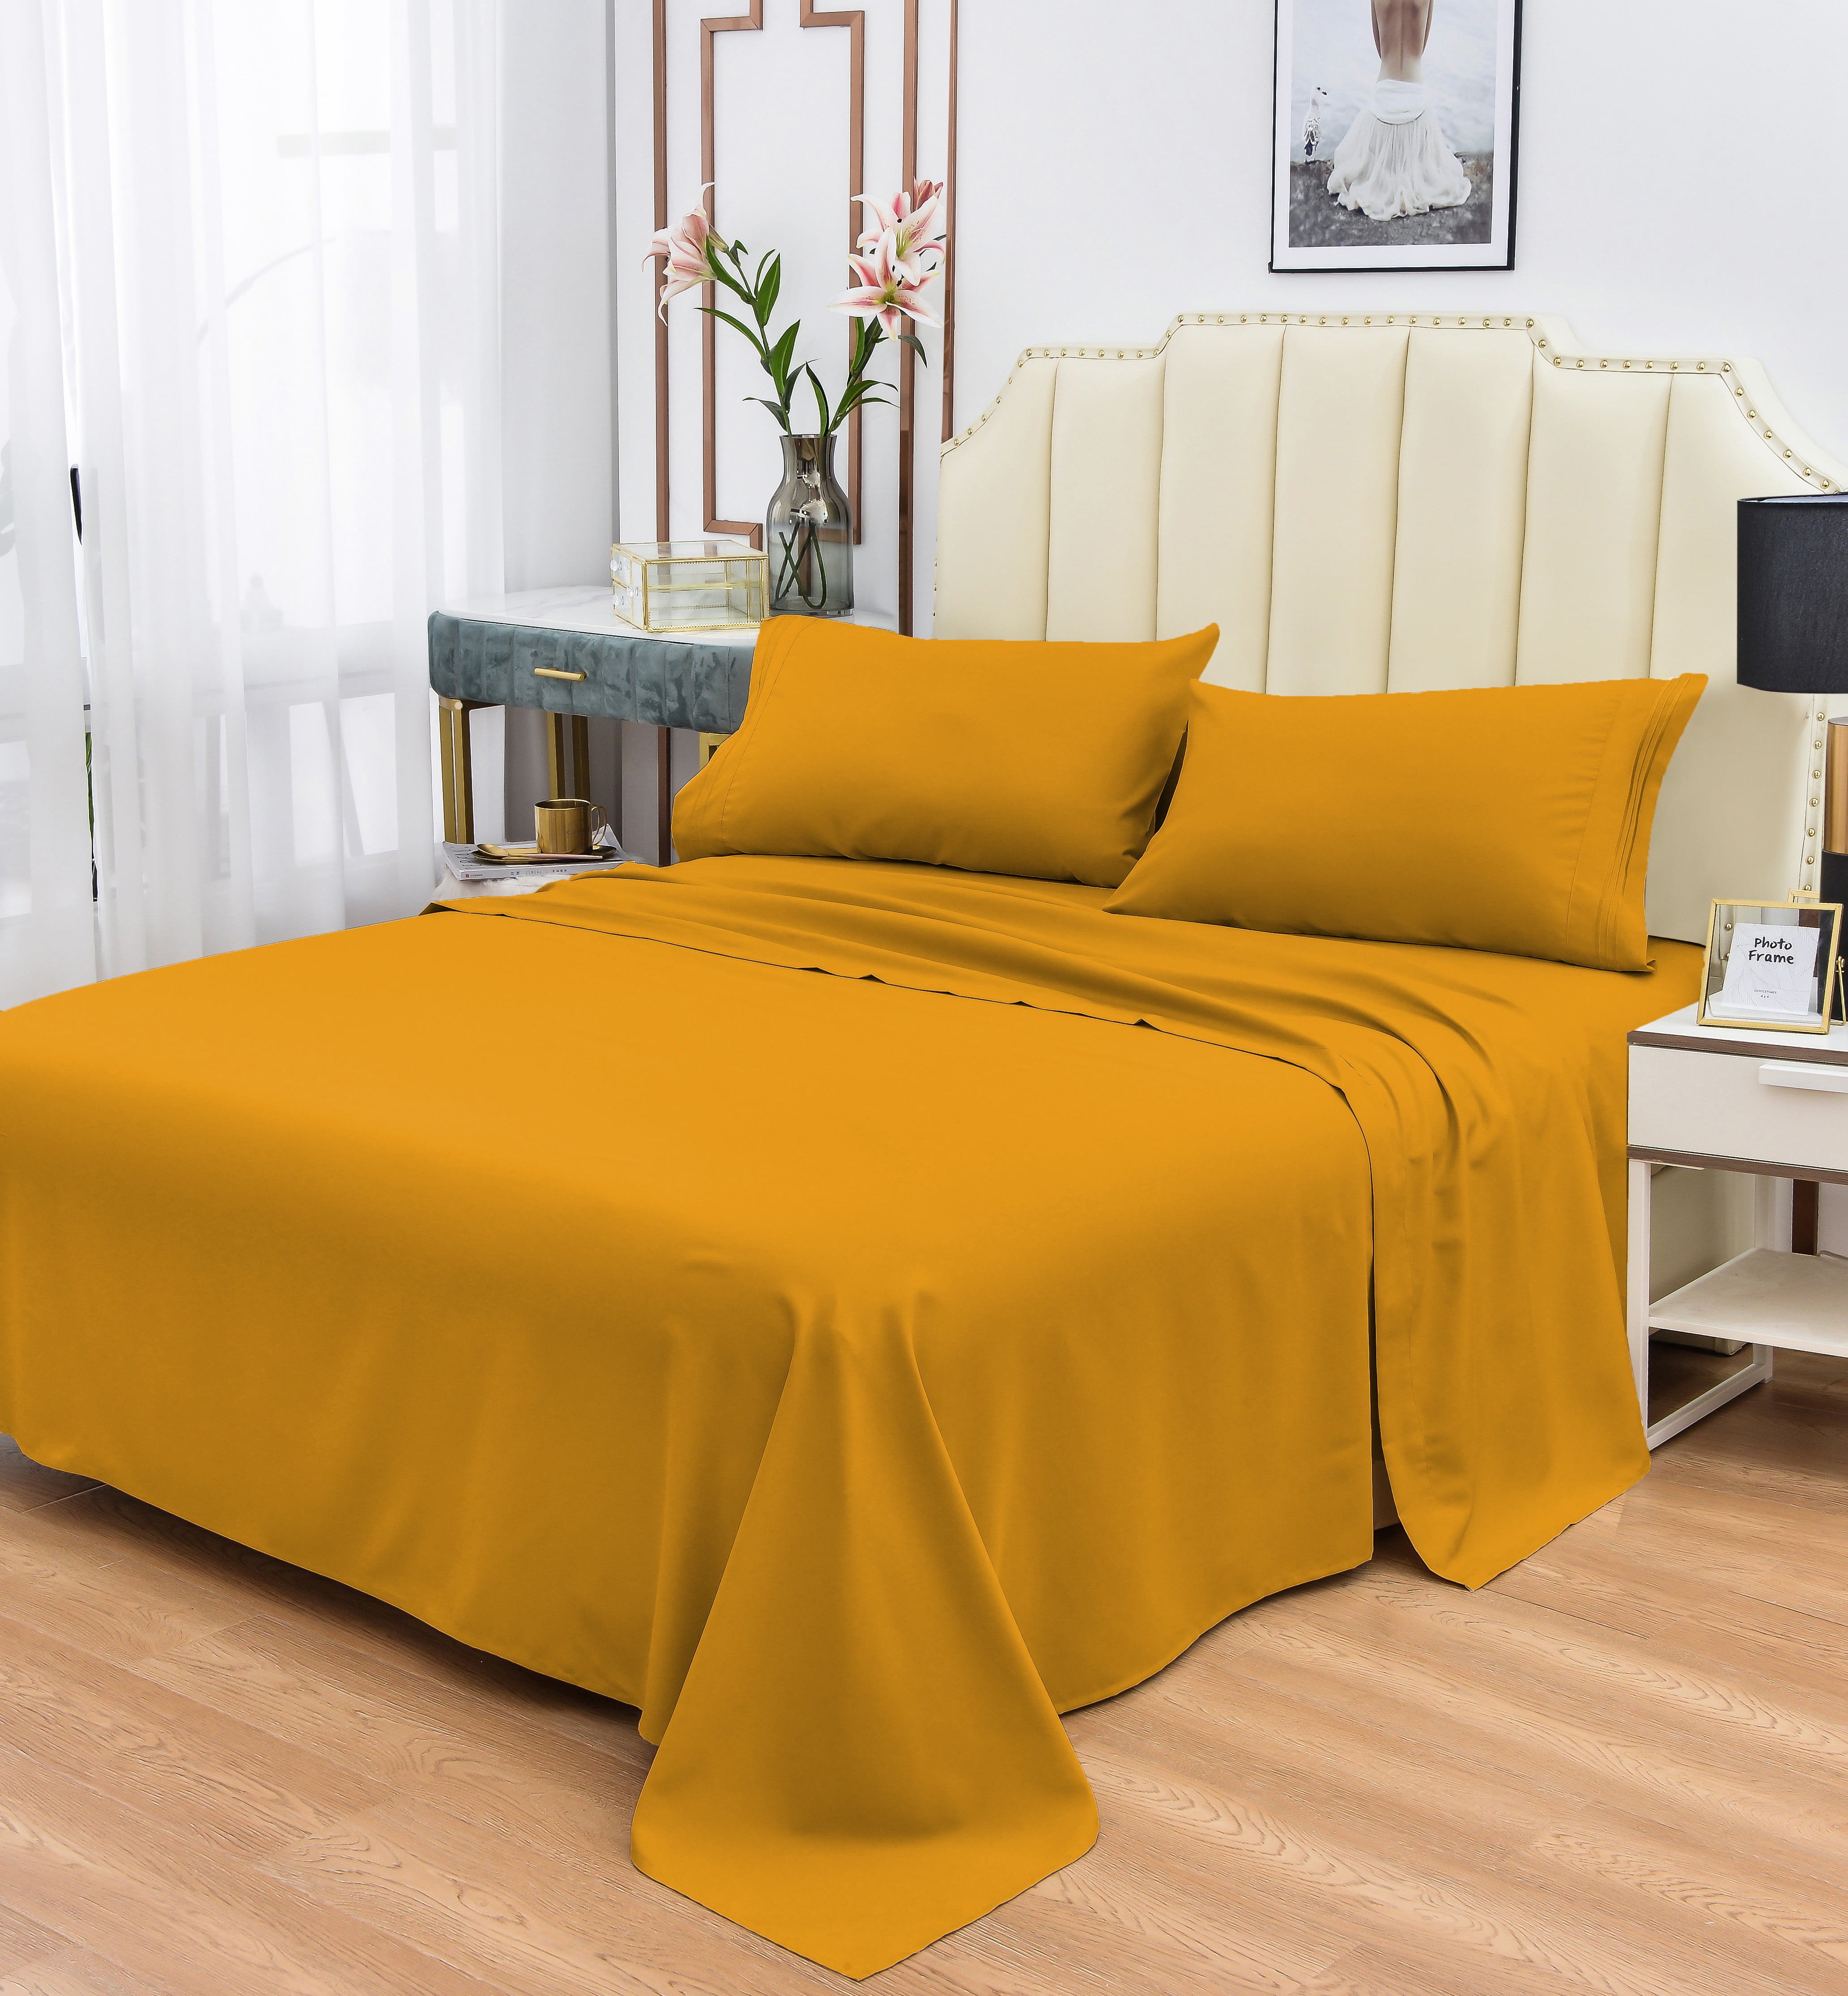 Details about   Comfort Fitted Sheet+2 Pillow Case Extra Deep Pocket Solid Colors US Twin 